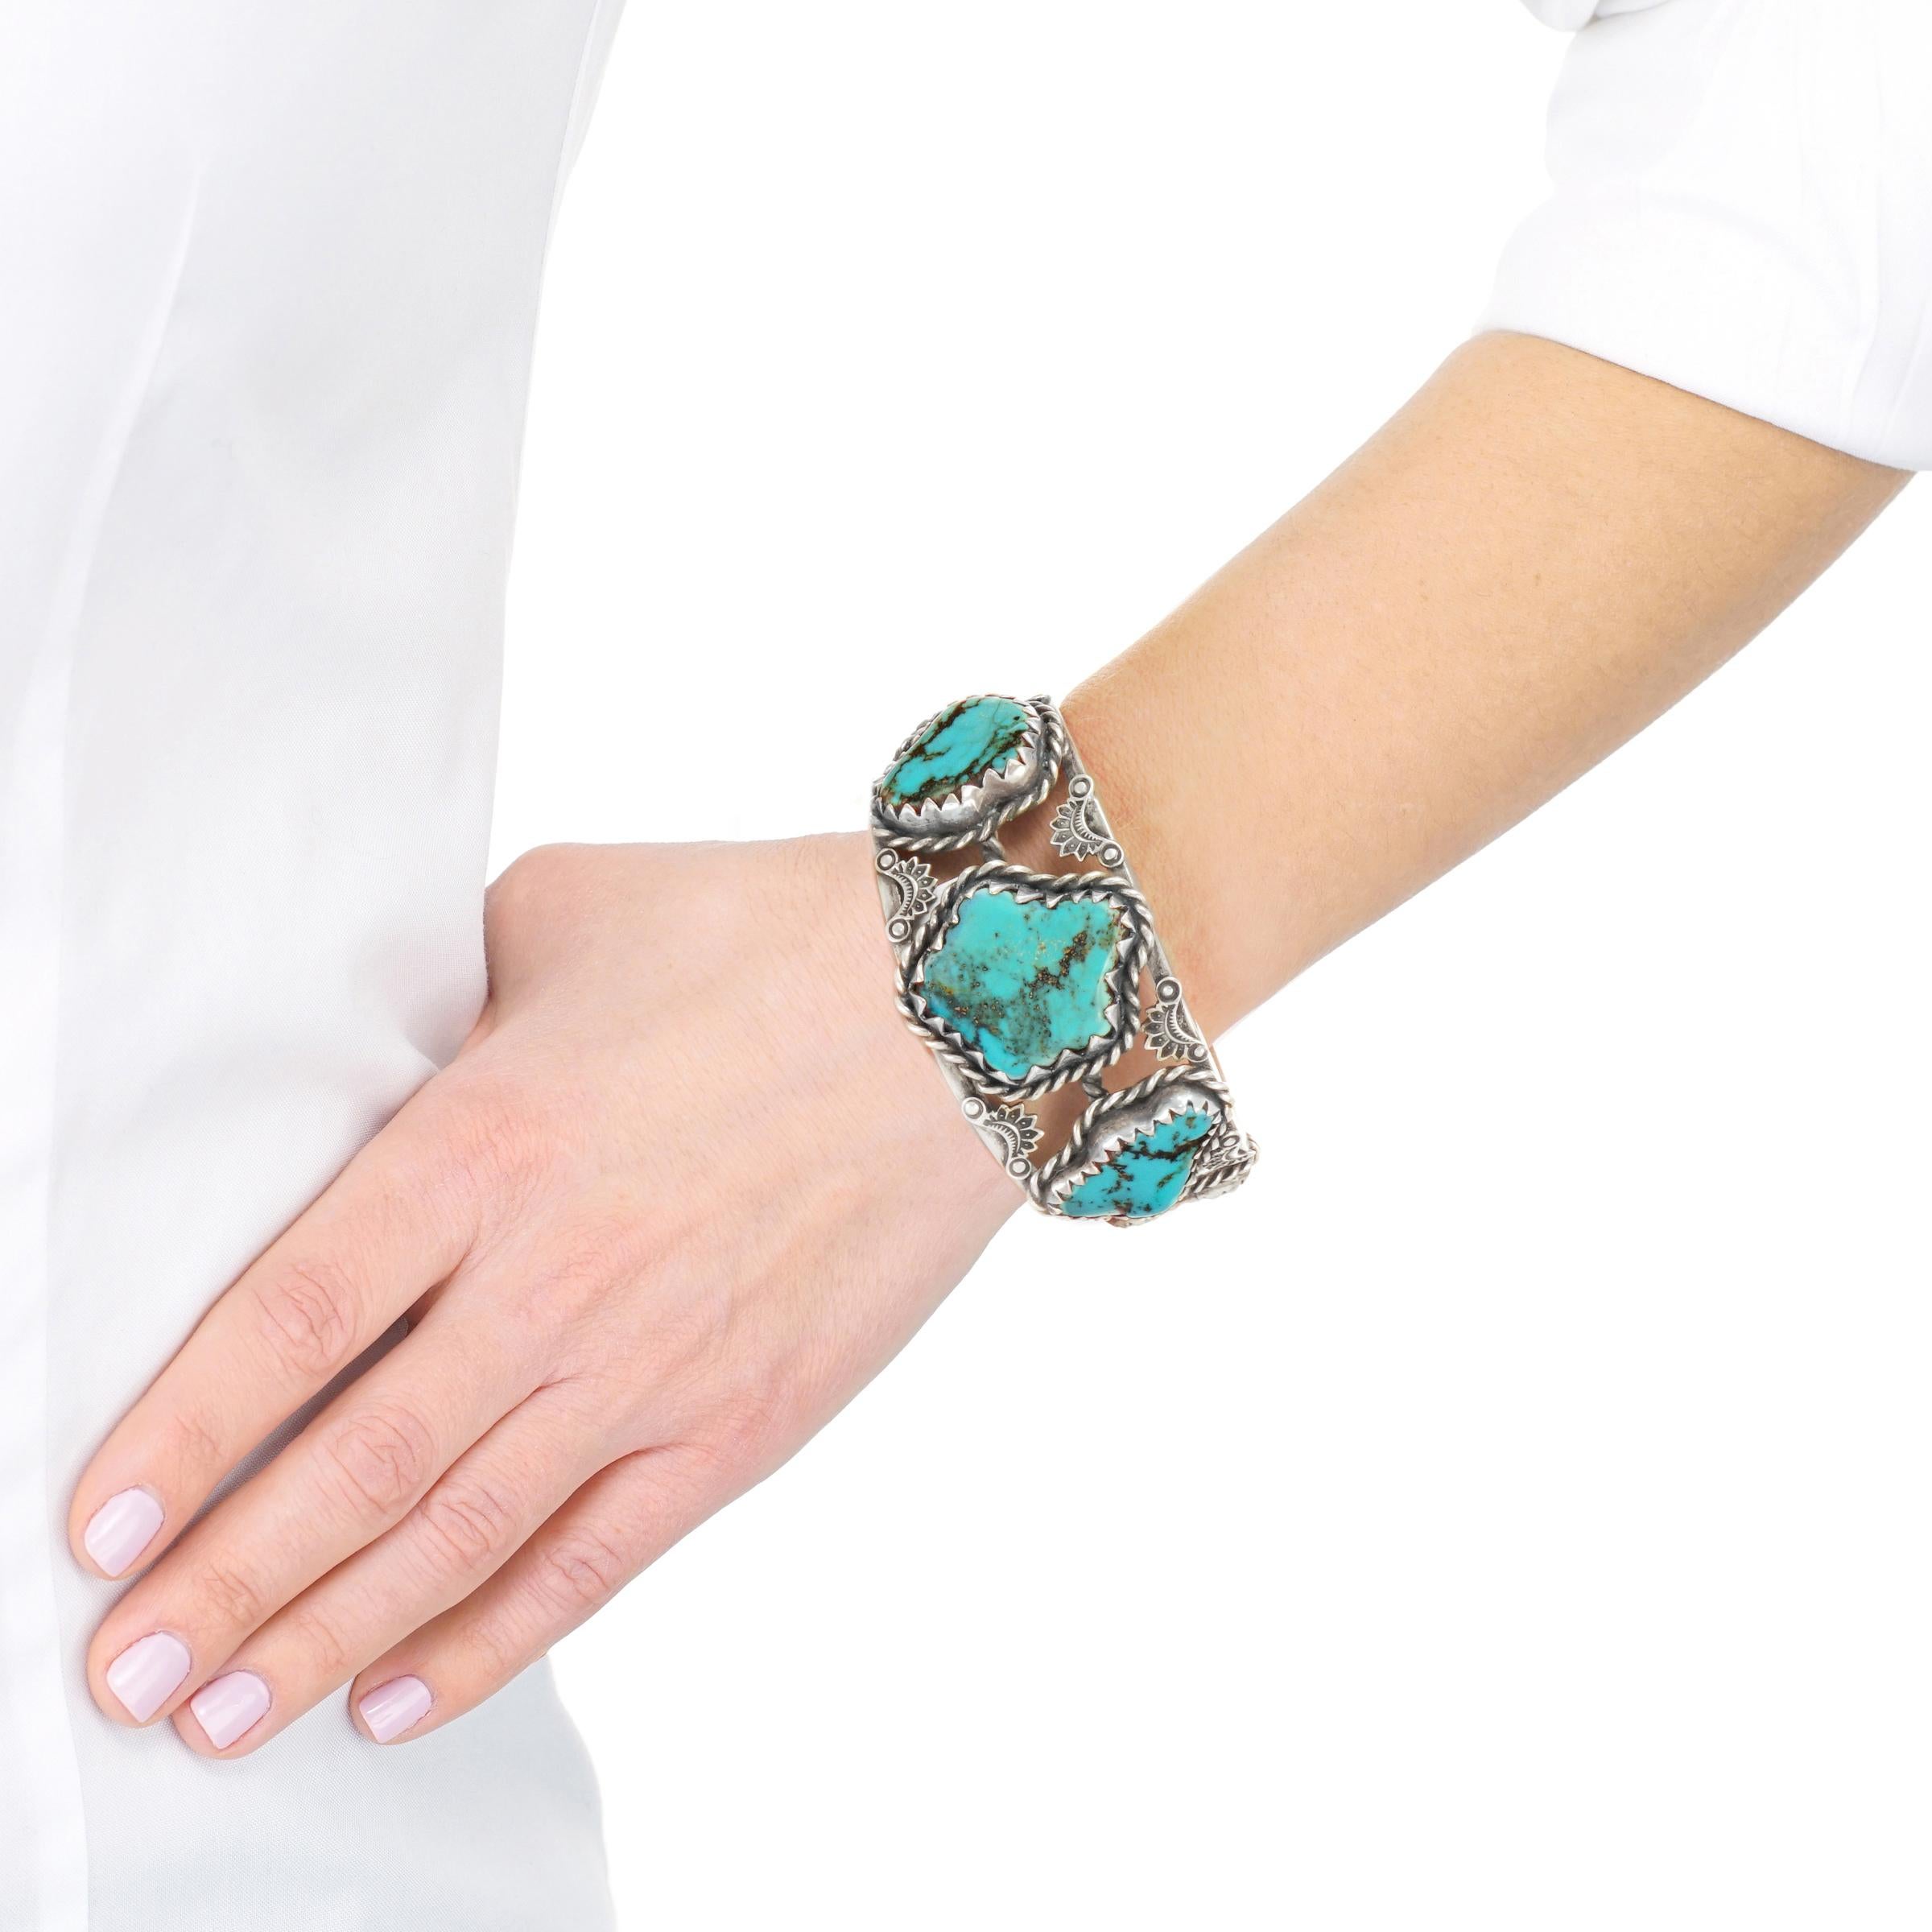 Cabochon Navajo Sterling Openwork Cuff with Five Large Turquoise Stones